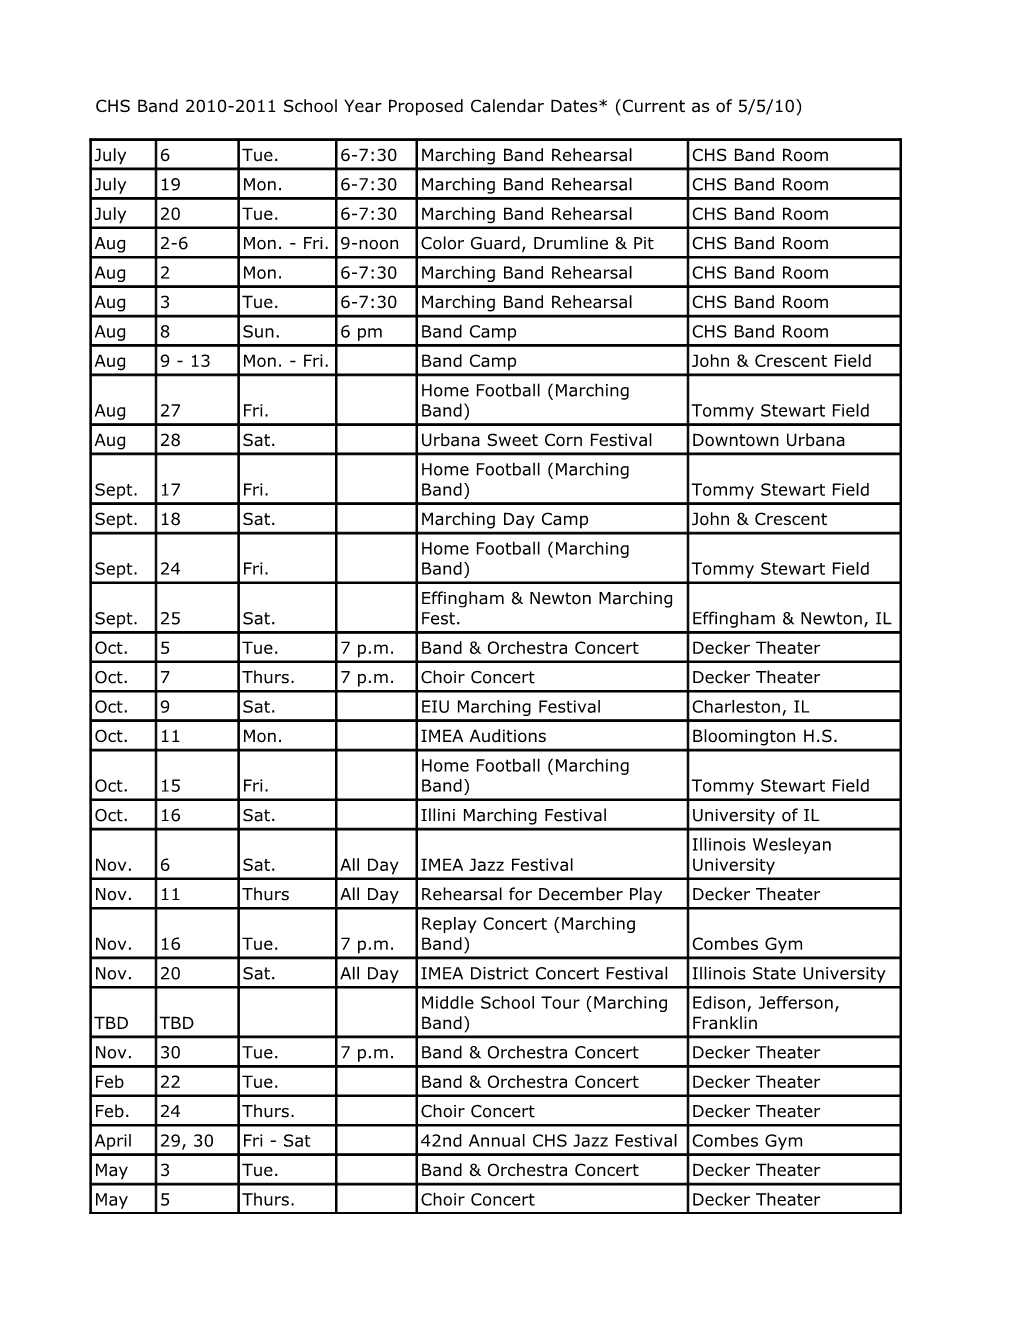 CCHS Handout for 2010-11 Band Dates